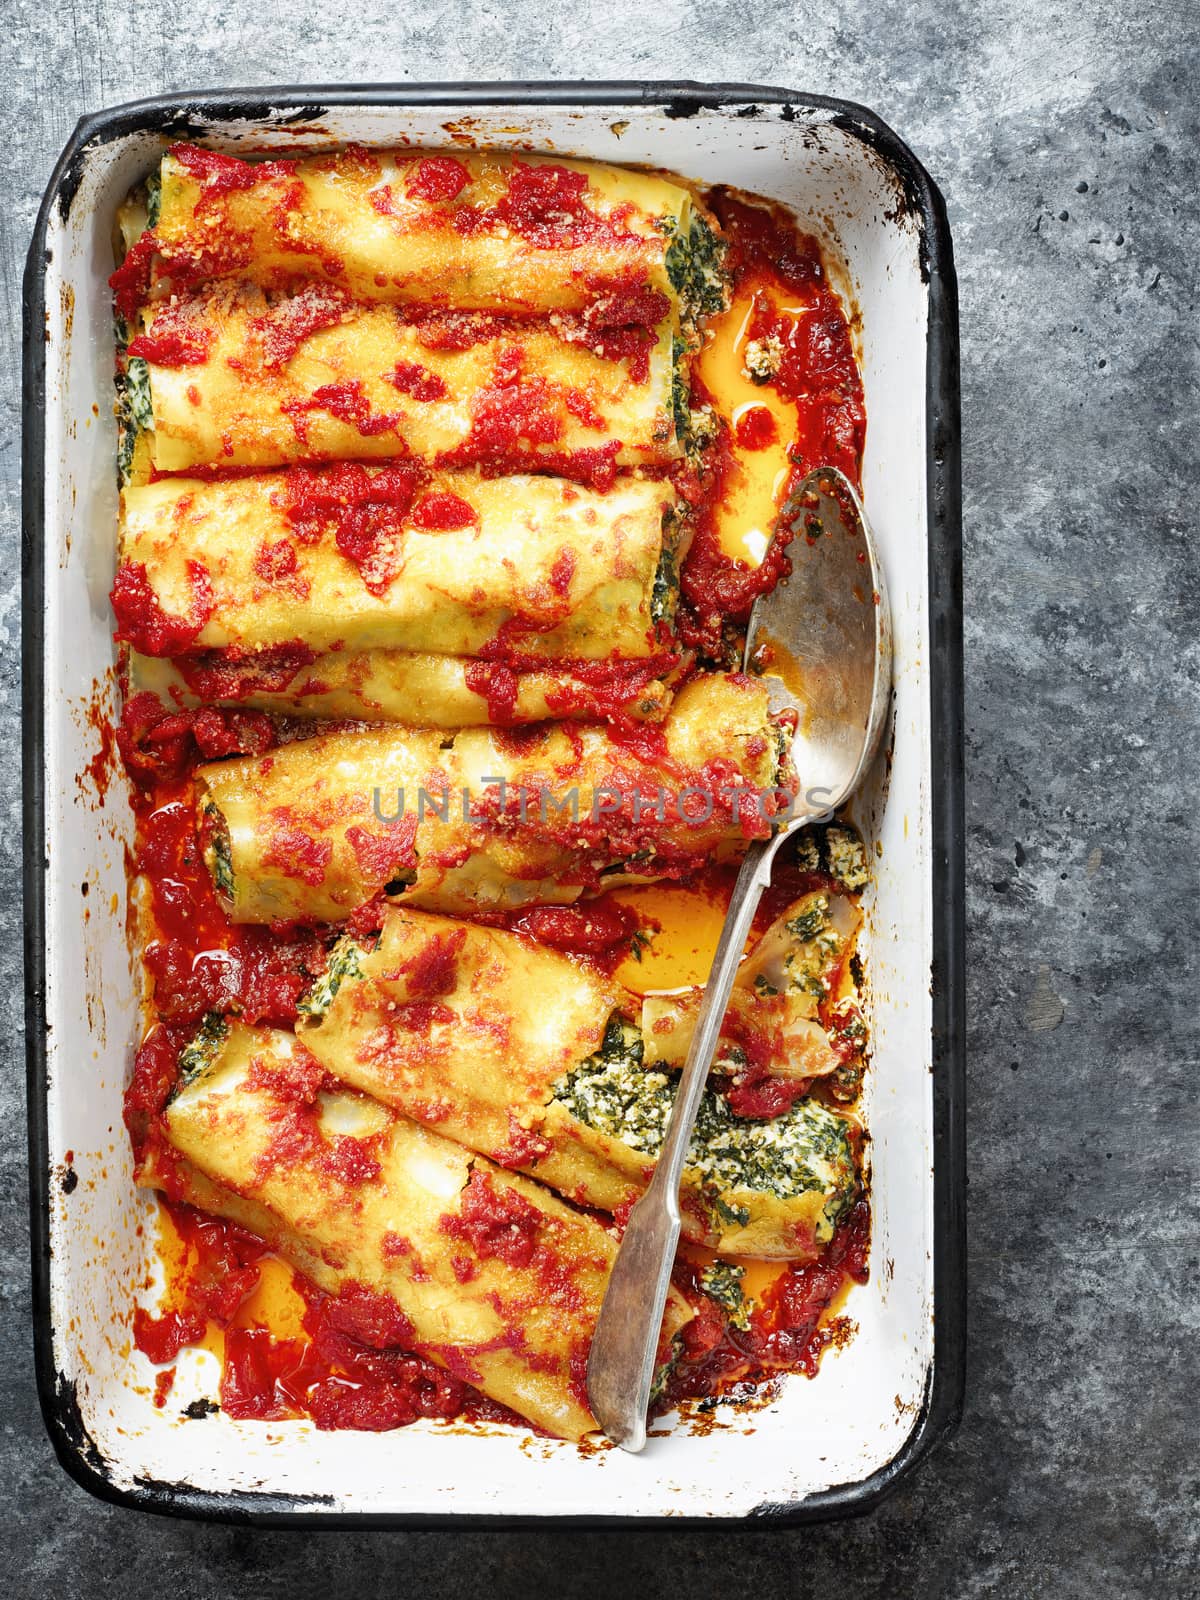 rustic italian spinach ricotta cannelloni pasta by zkruger